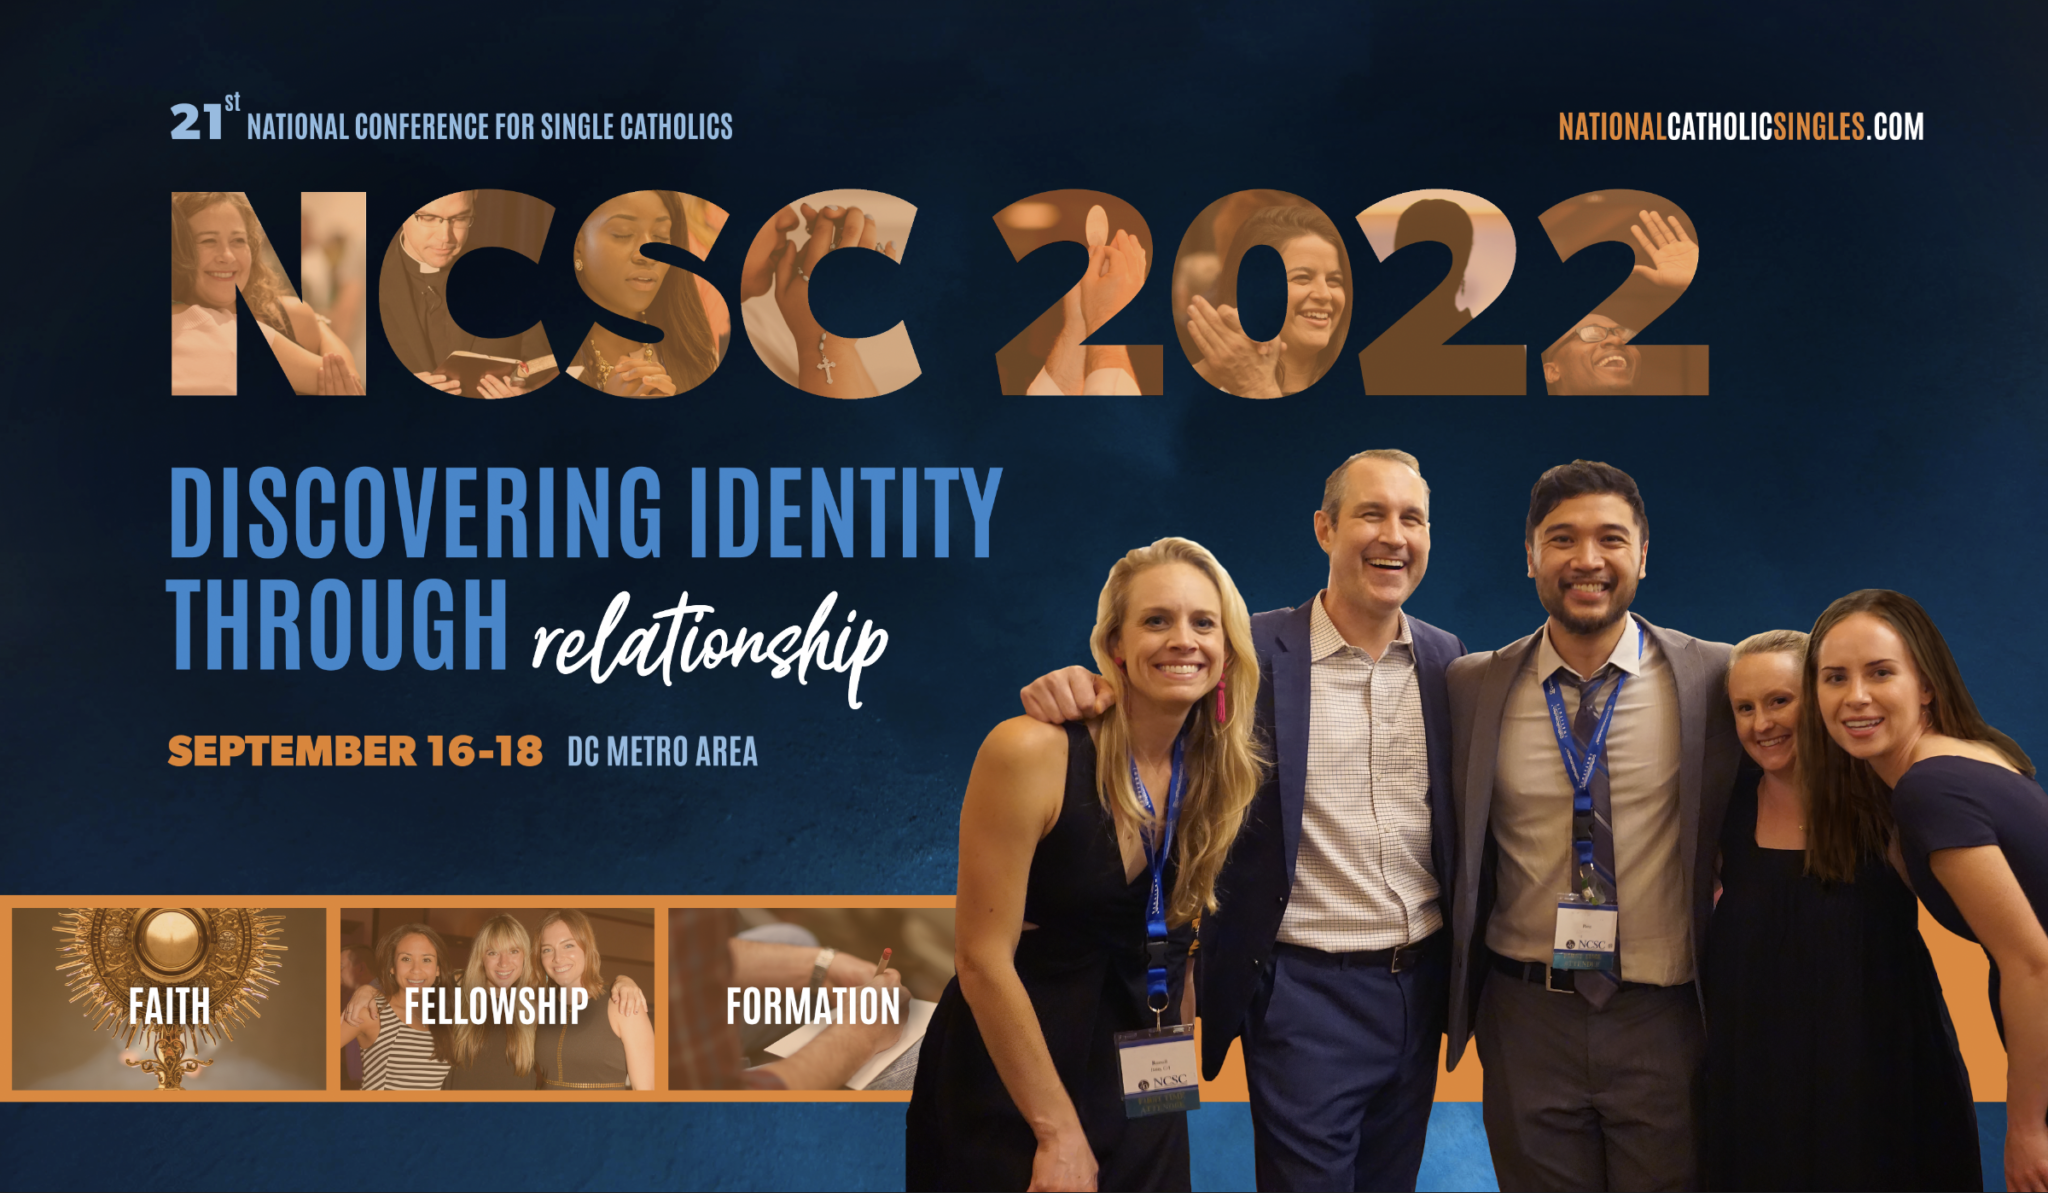 NCSC 2022 Annual Conference « National Conference for Single Catholics